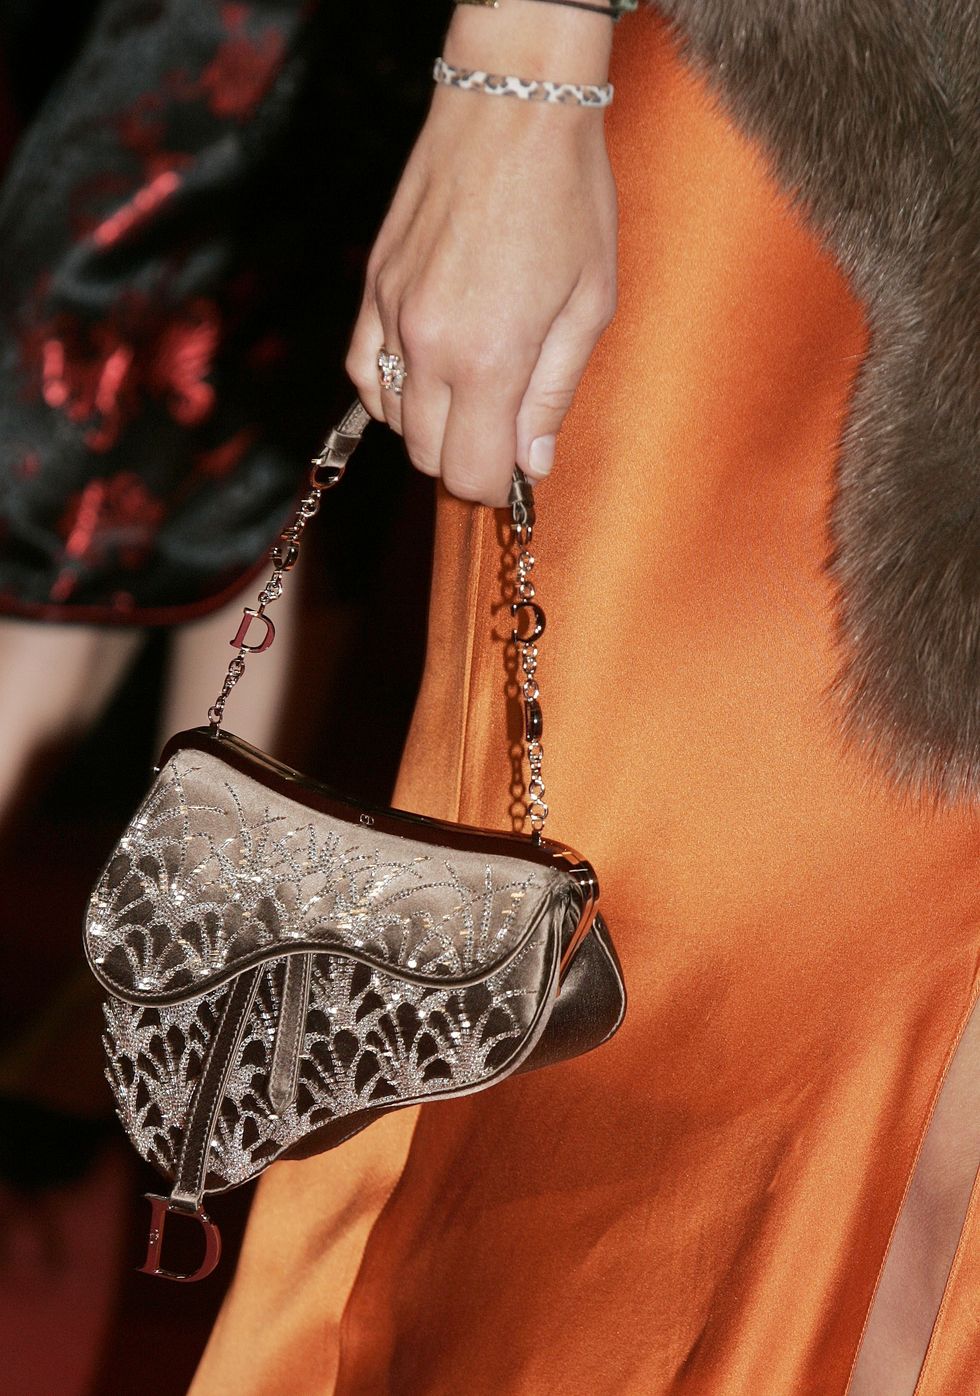 The 10 Best Designer Bags That Will Never Go Out Of Style